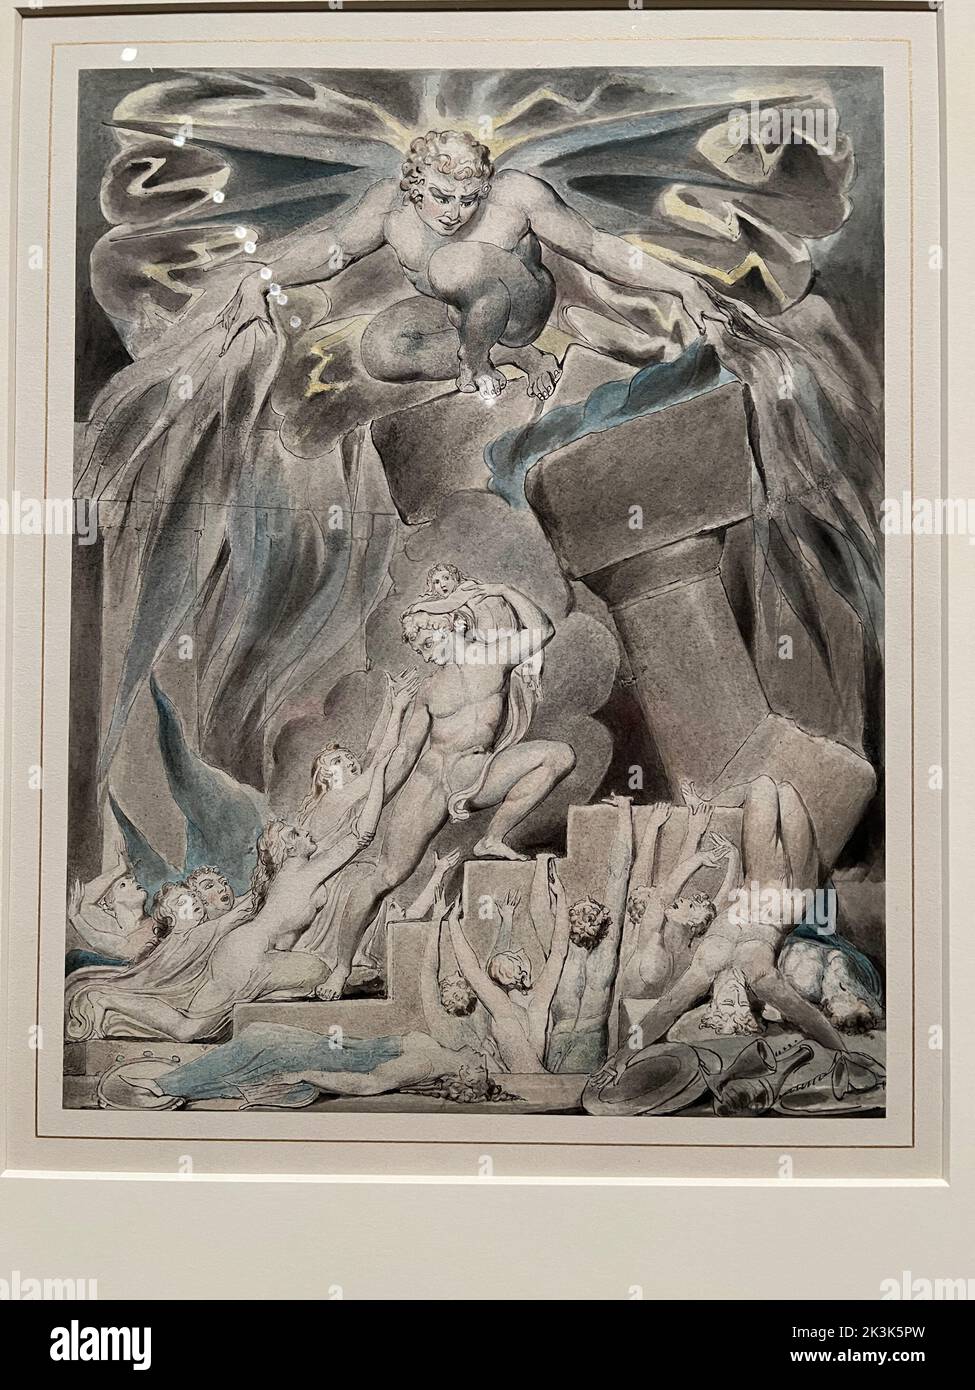 William Blake (1757-1827) Job's Sons and Daughter Overwhelmed by Satan, ca. 1805-10 Pen and black and gray ink, gray wash, and watercolor, over traces of graphite THE MORGAN LIBRARY & MUSEUM, New York City. Stock Photo